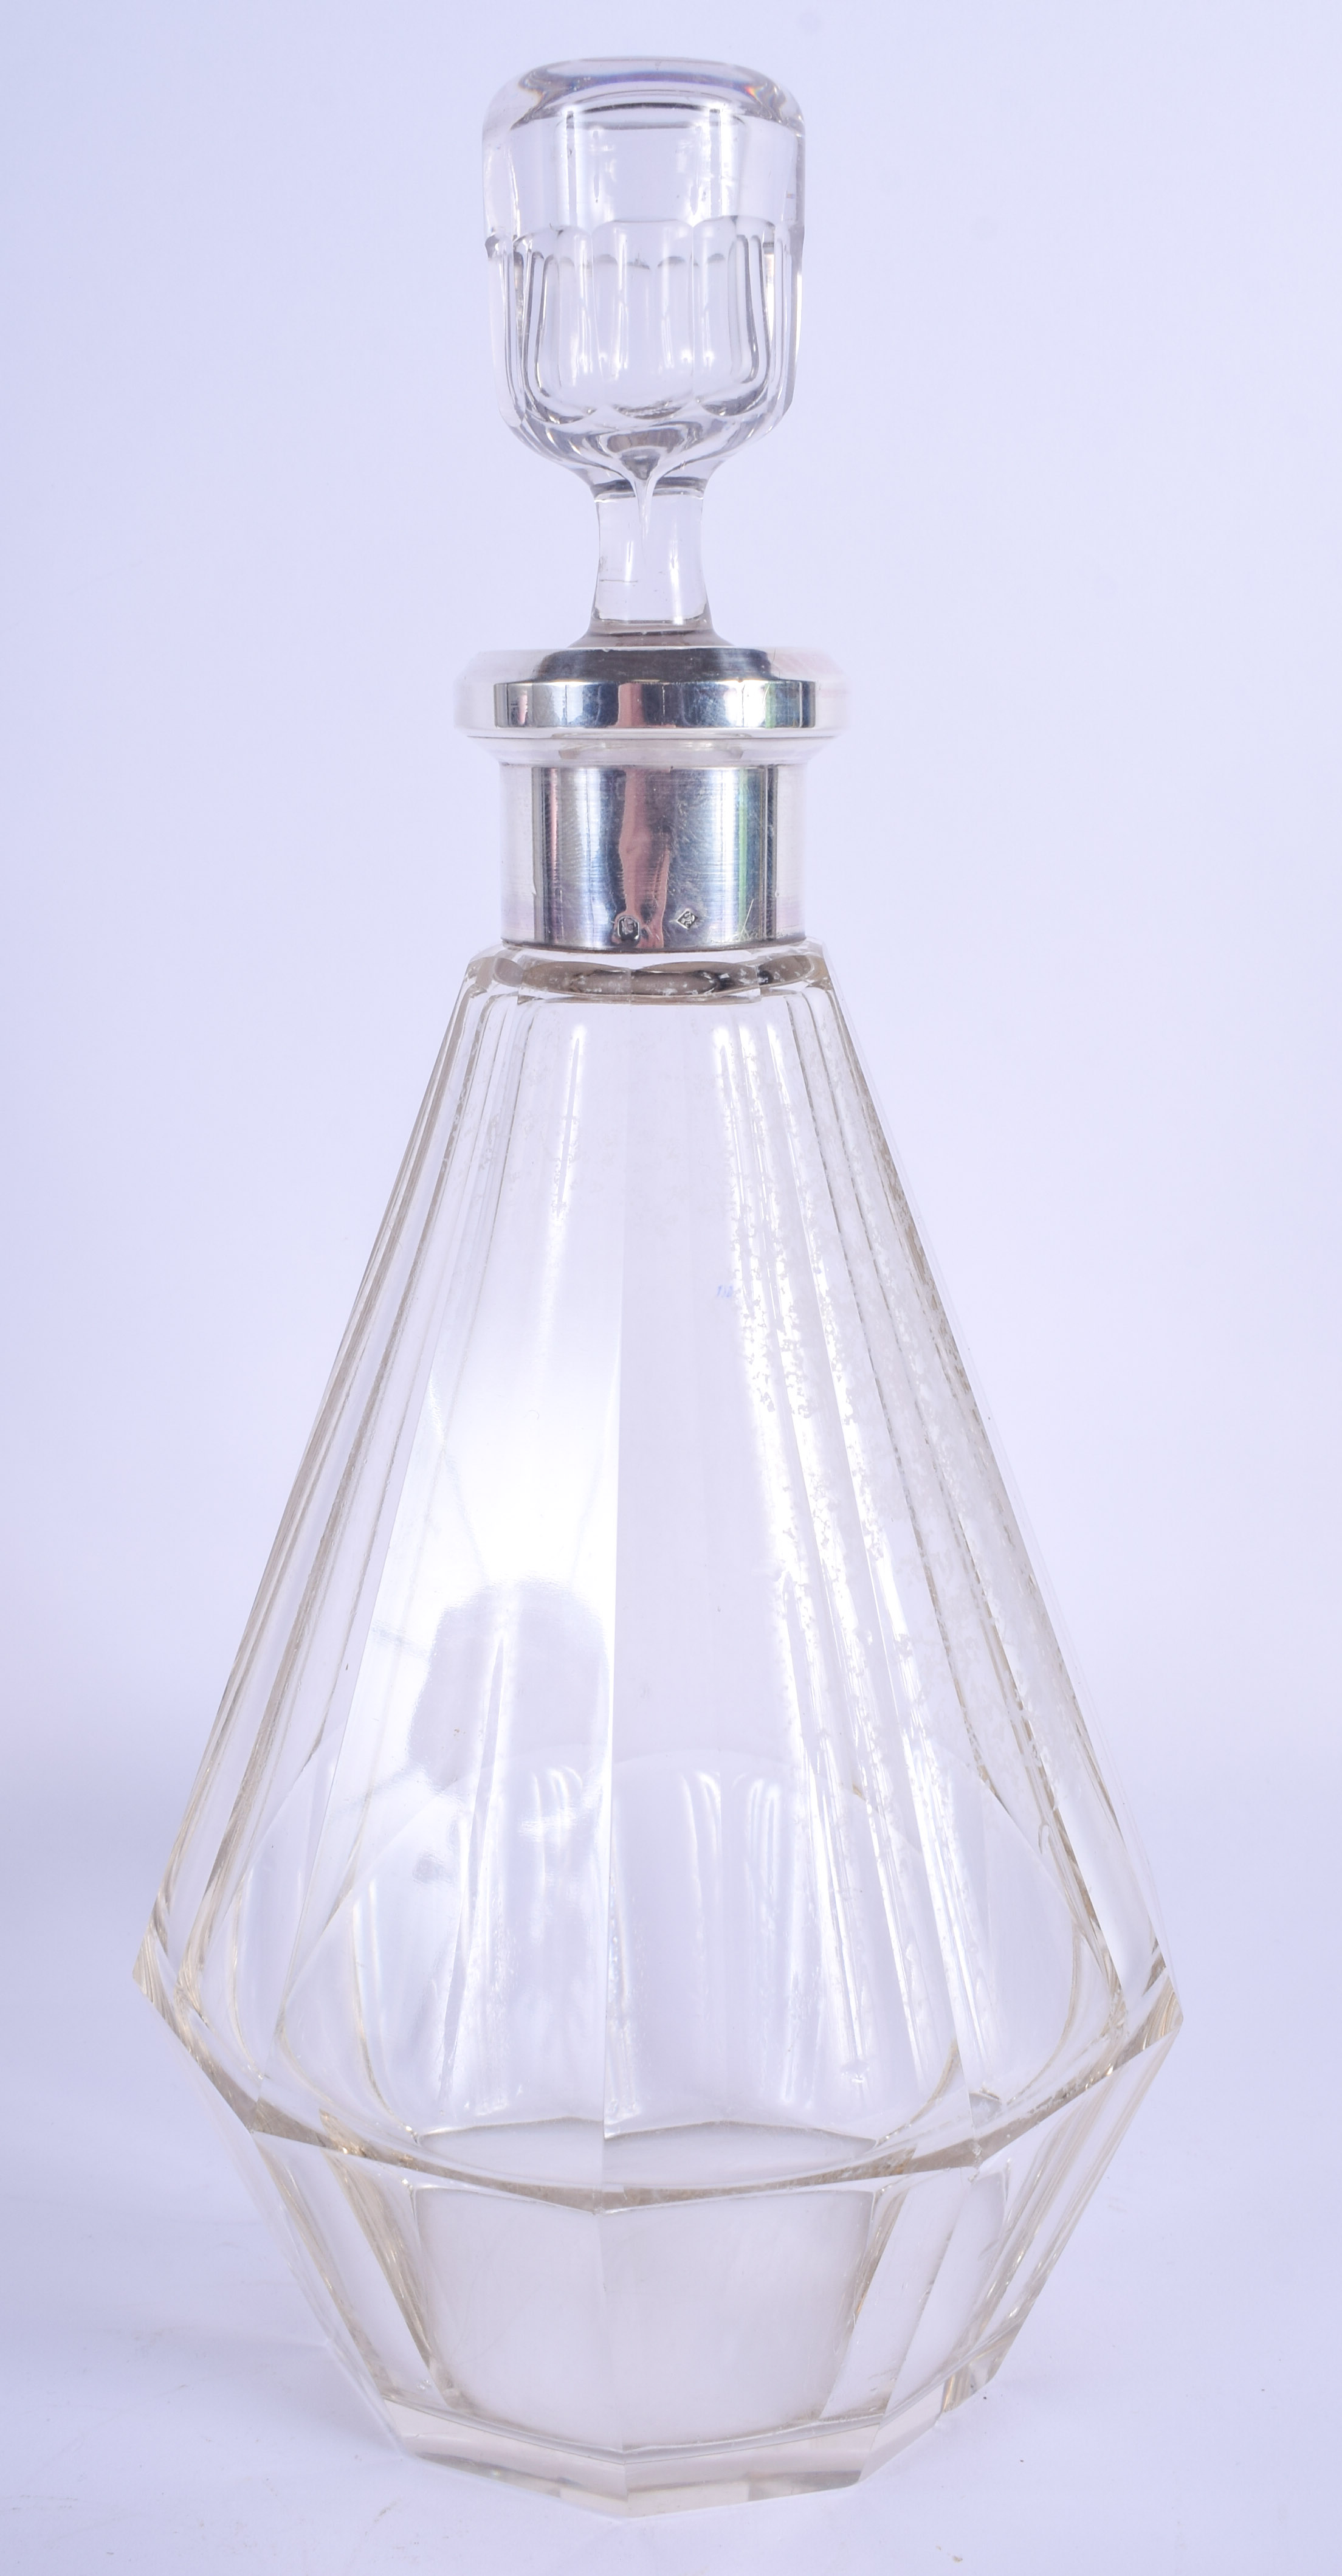 AN ART DECO SILVER MOUNTED DECANTER AND STOPPER. 30 cm high.